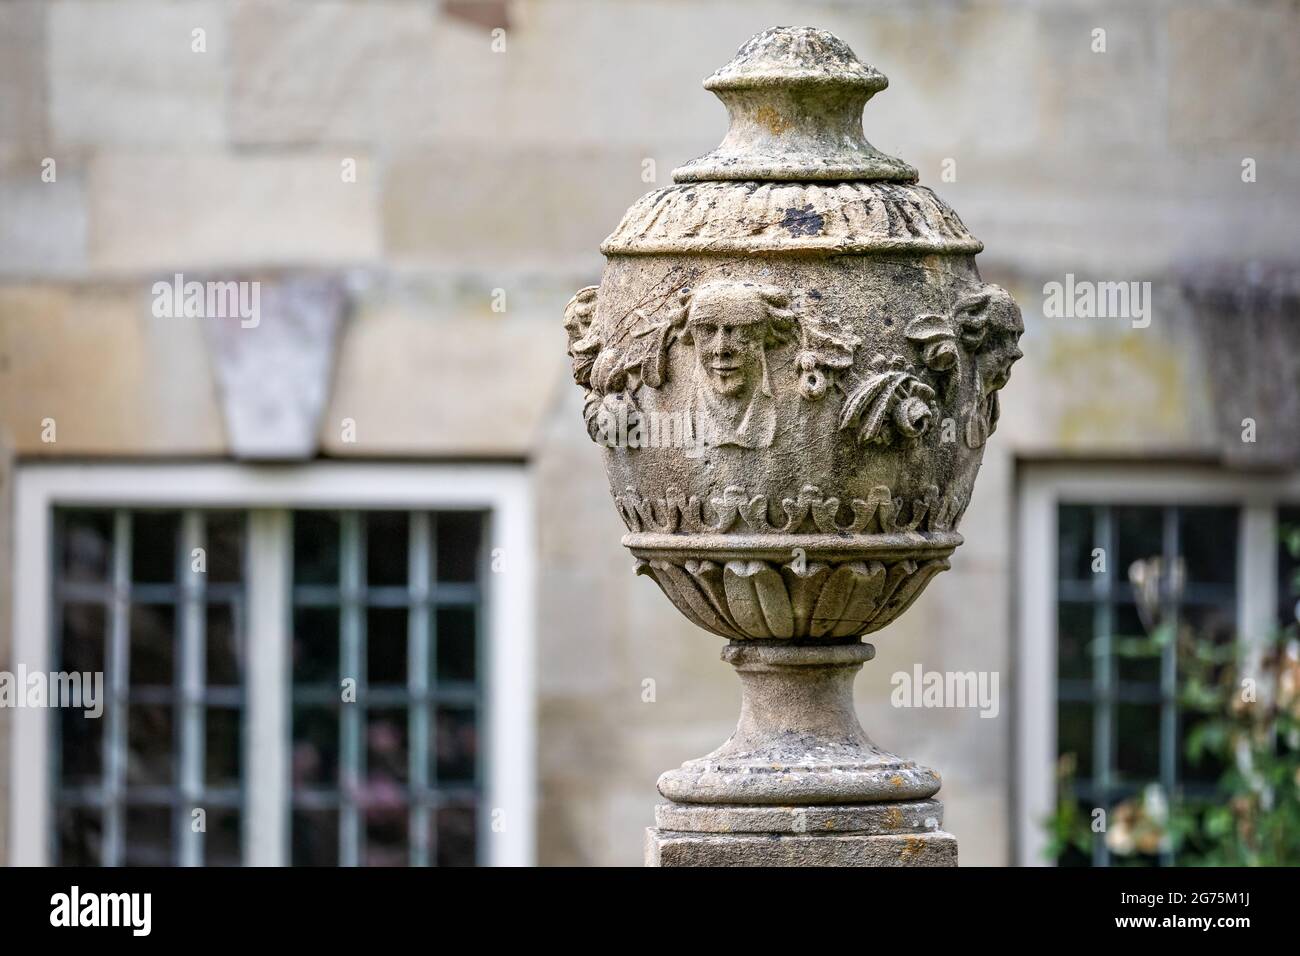 Close up of ornate carved stone vase or urn mounted on plinth in West Walk, Salisbury, Wiltshire, UK on 11 July 2021 Stock Photo